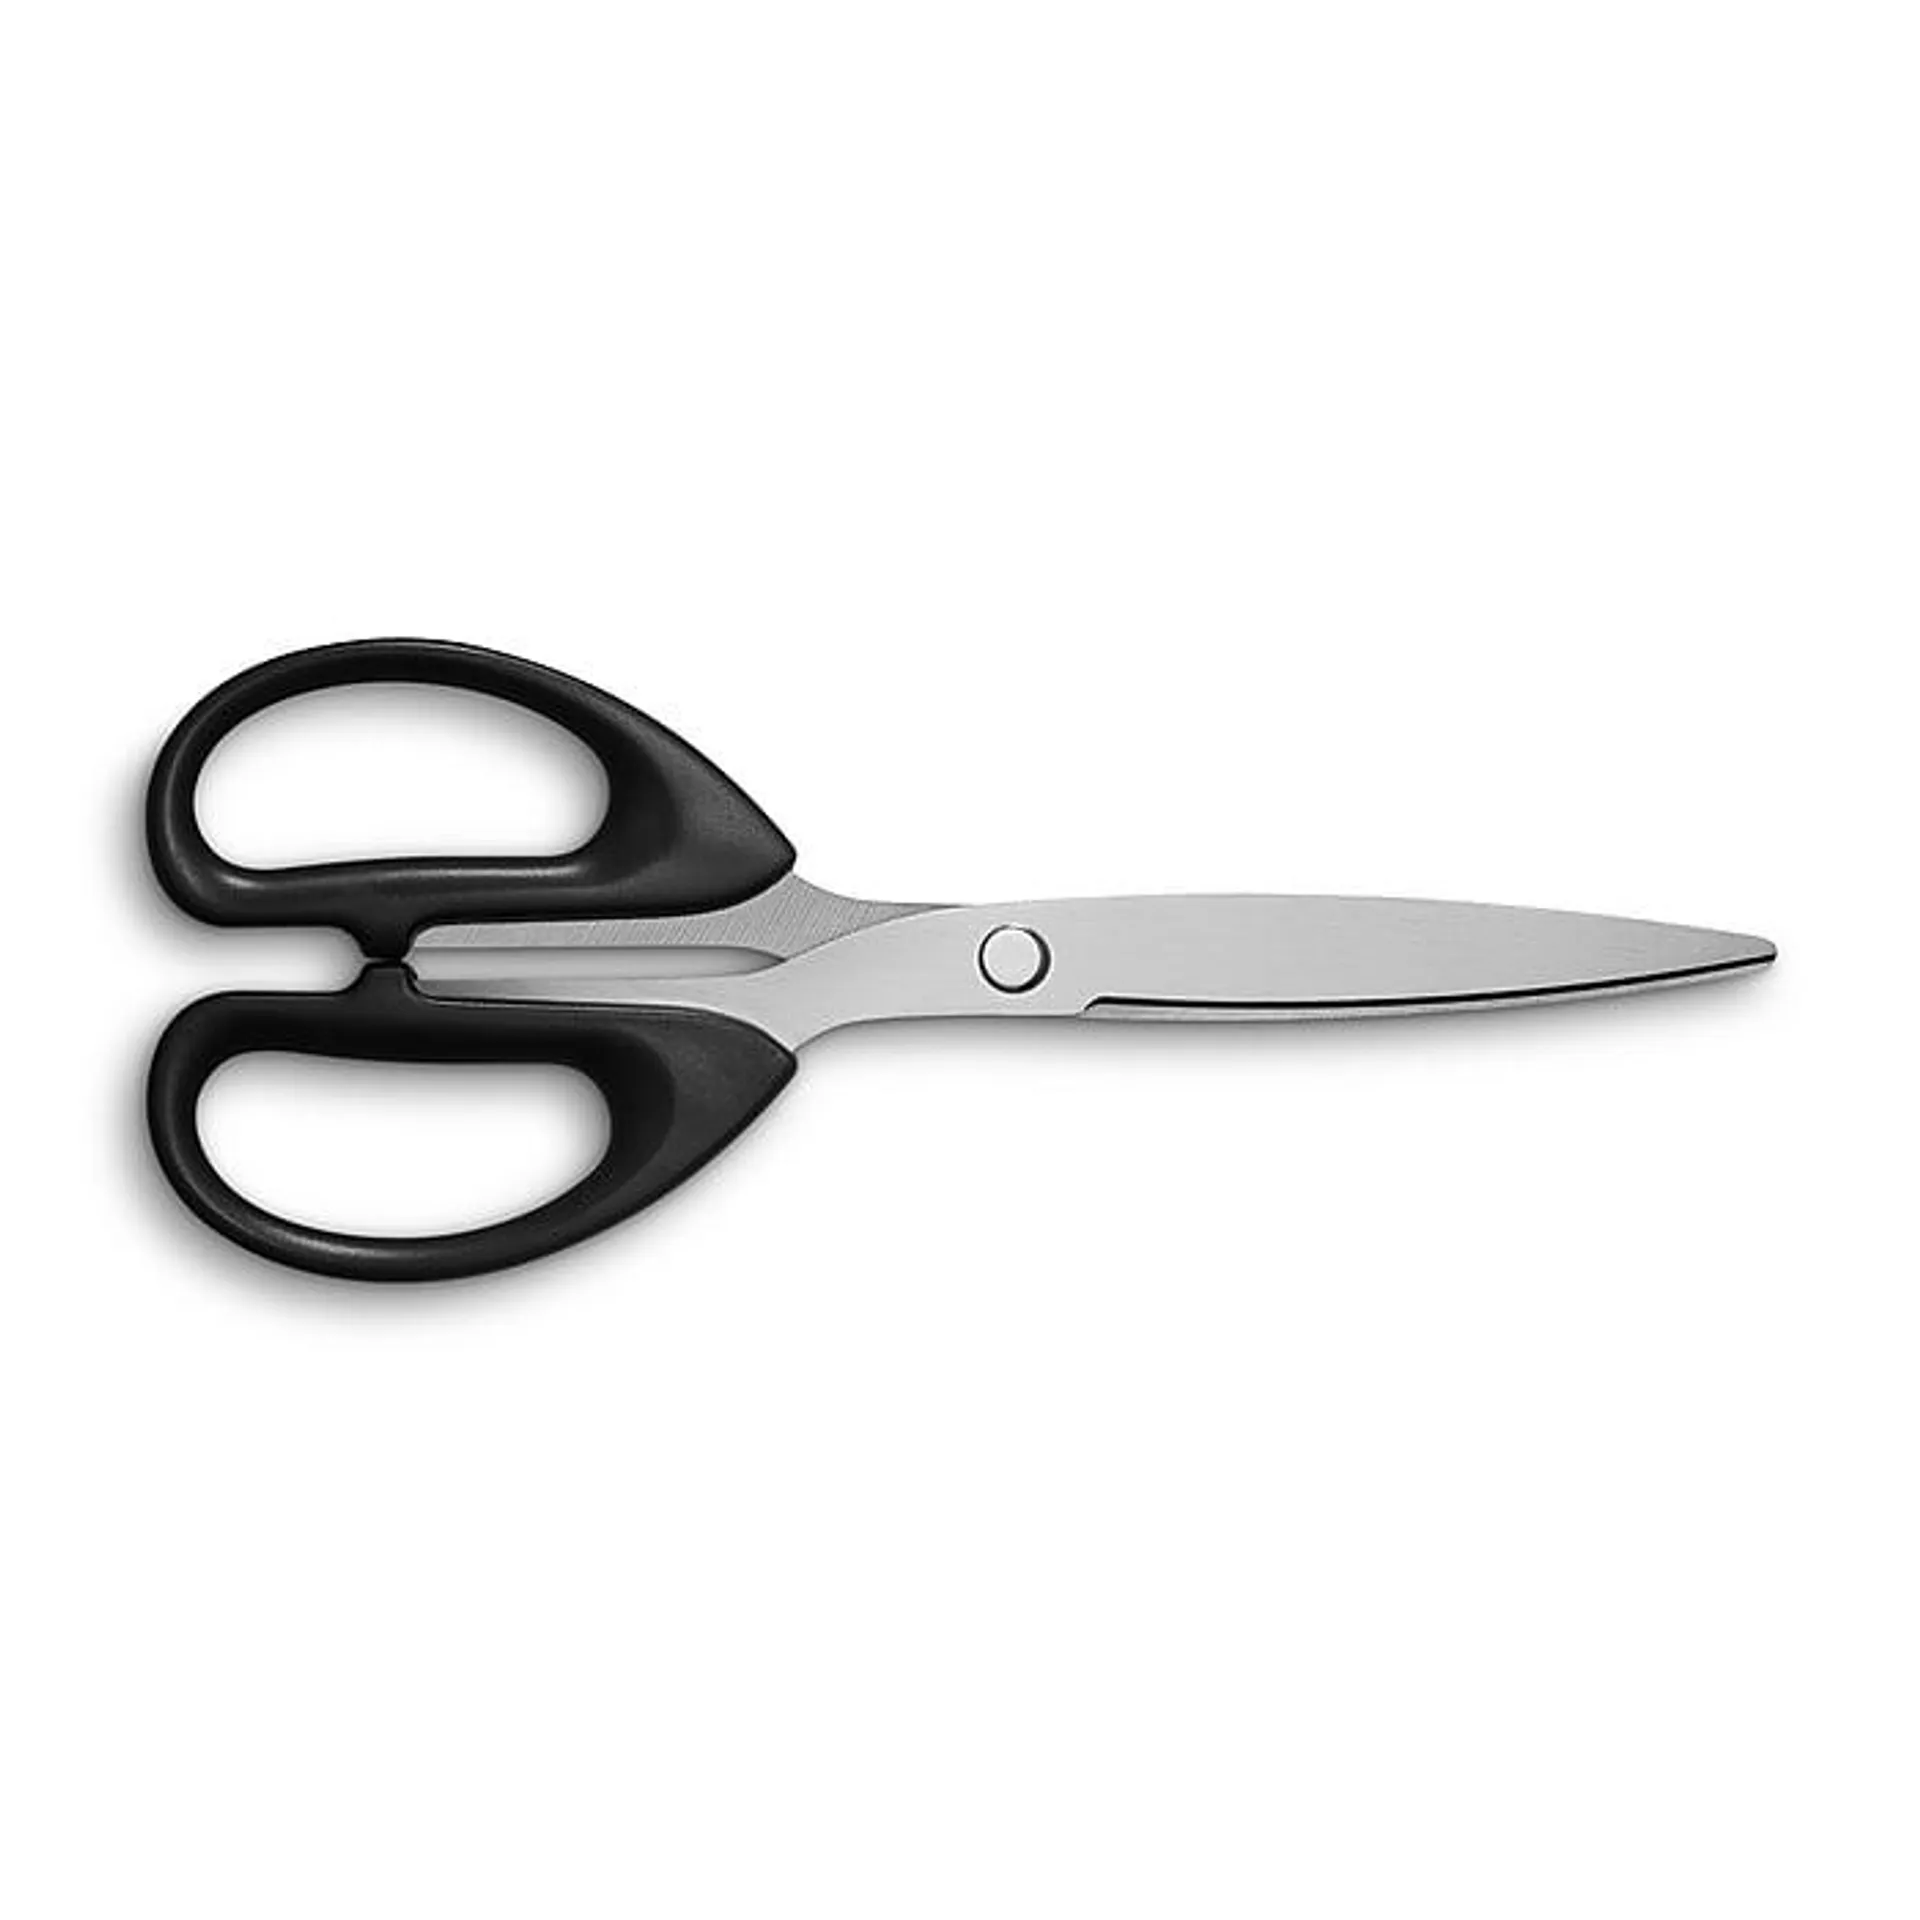 Staples 7" Pointed Tip Stainless Steel Scissors,